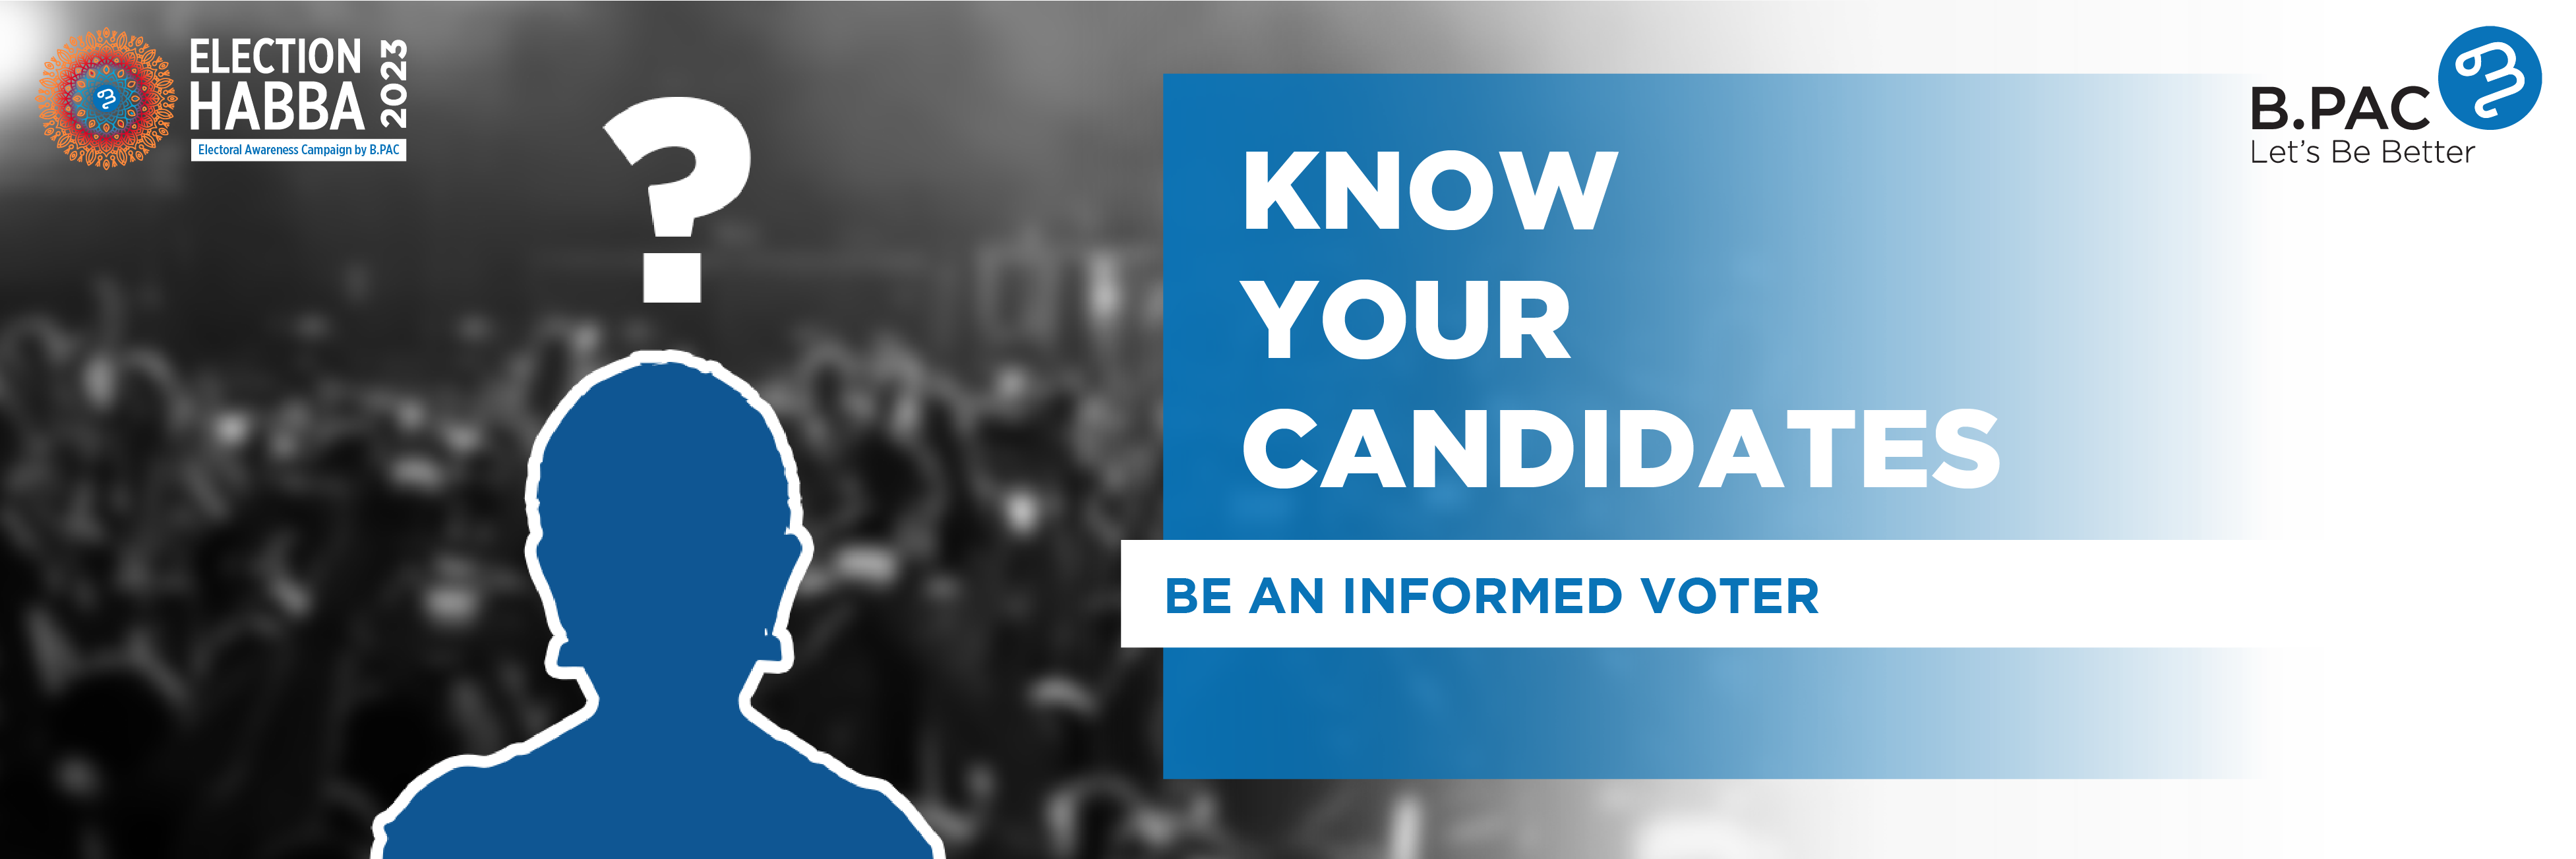 Make An Informed Choice With ECI's 'Know Your Candidate' App